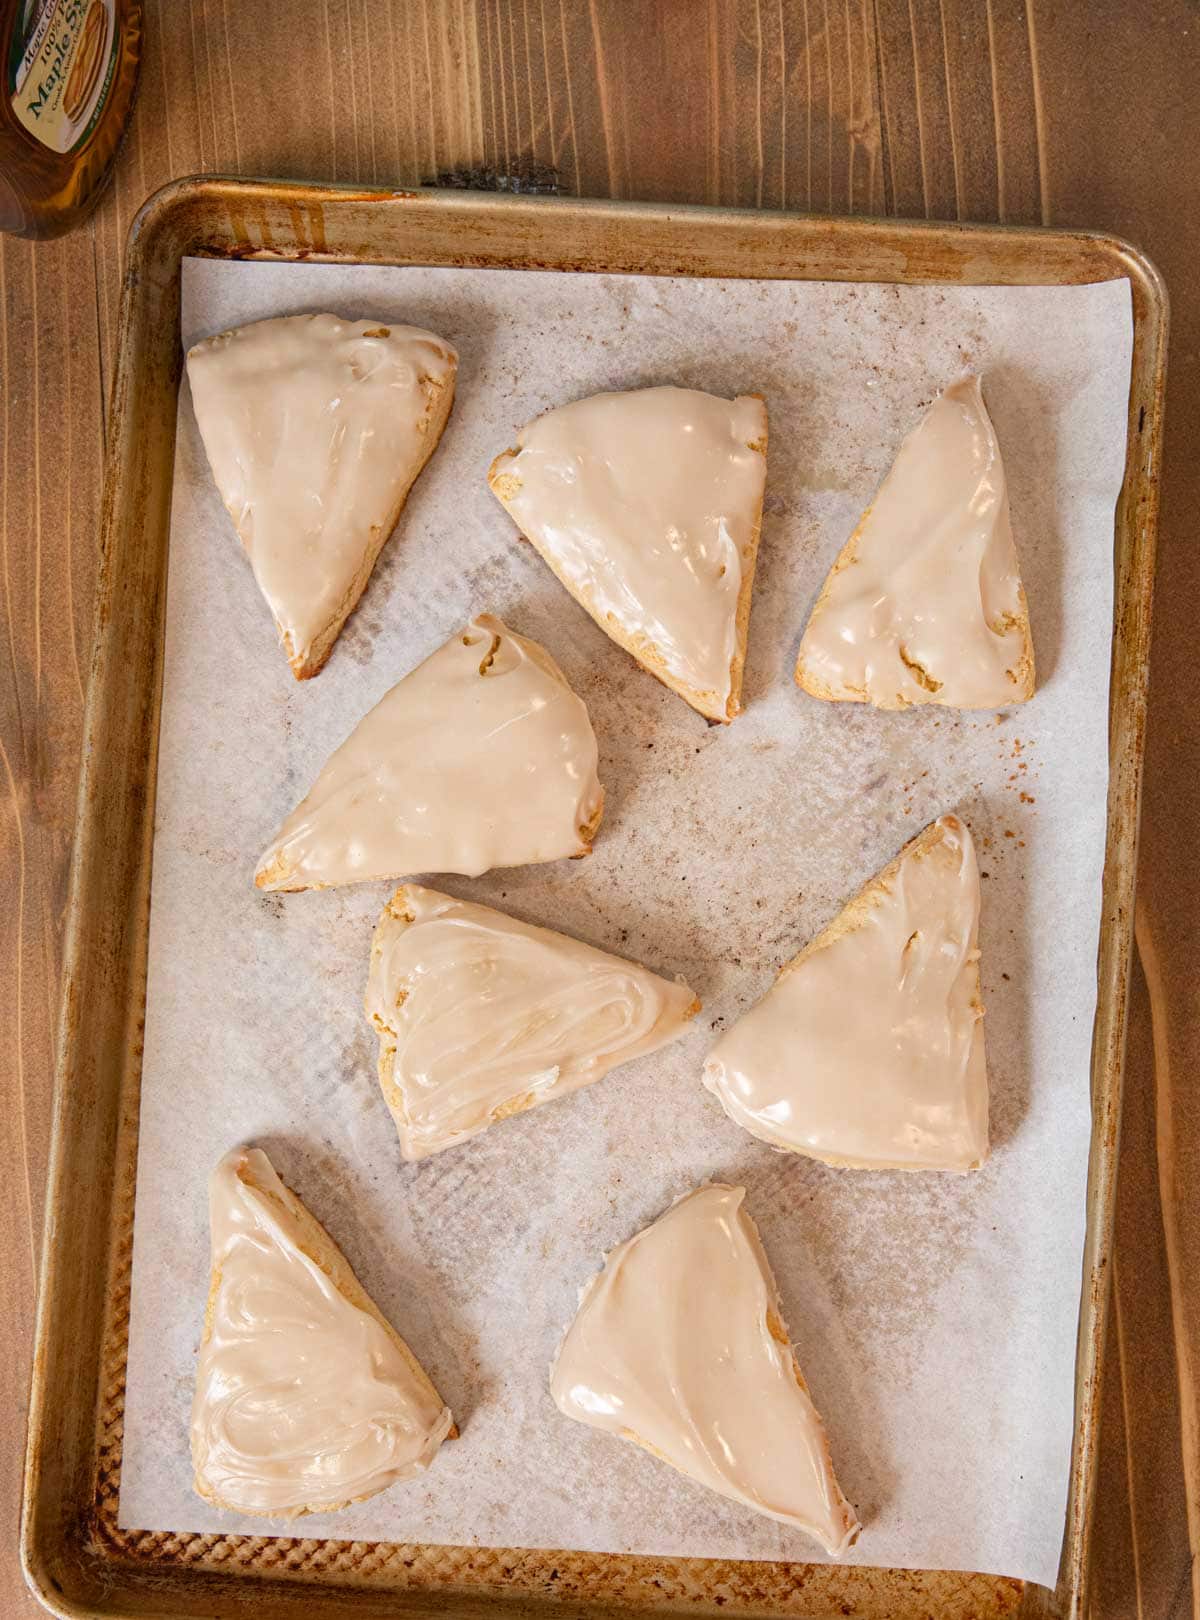 Maple Scones on baking sheet covered with icing